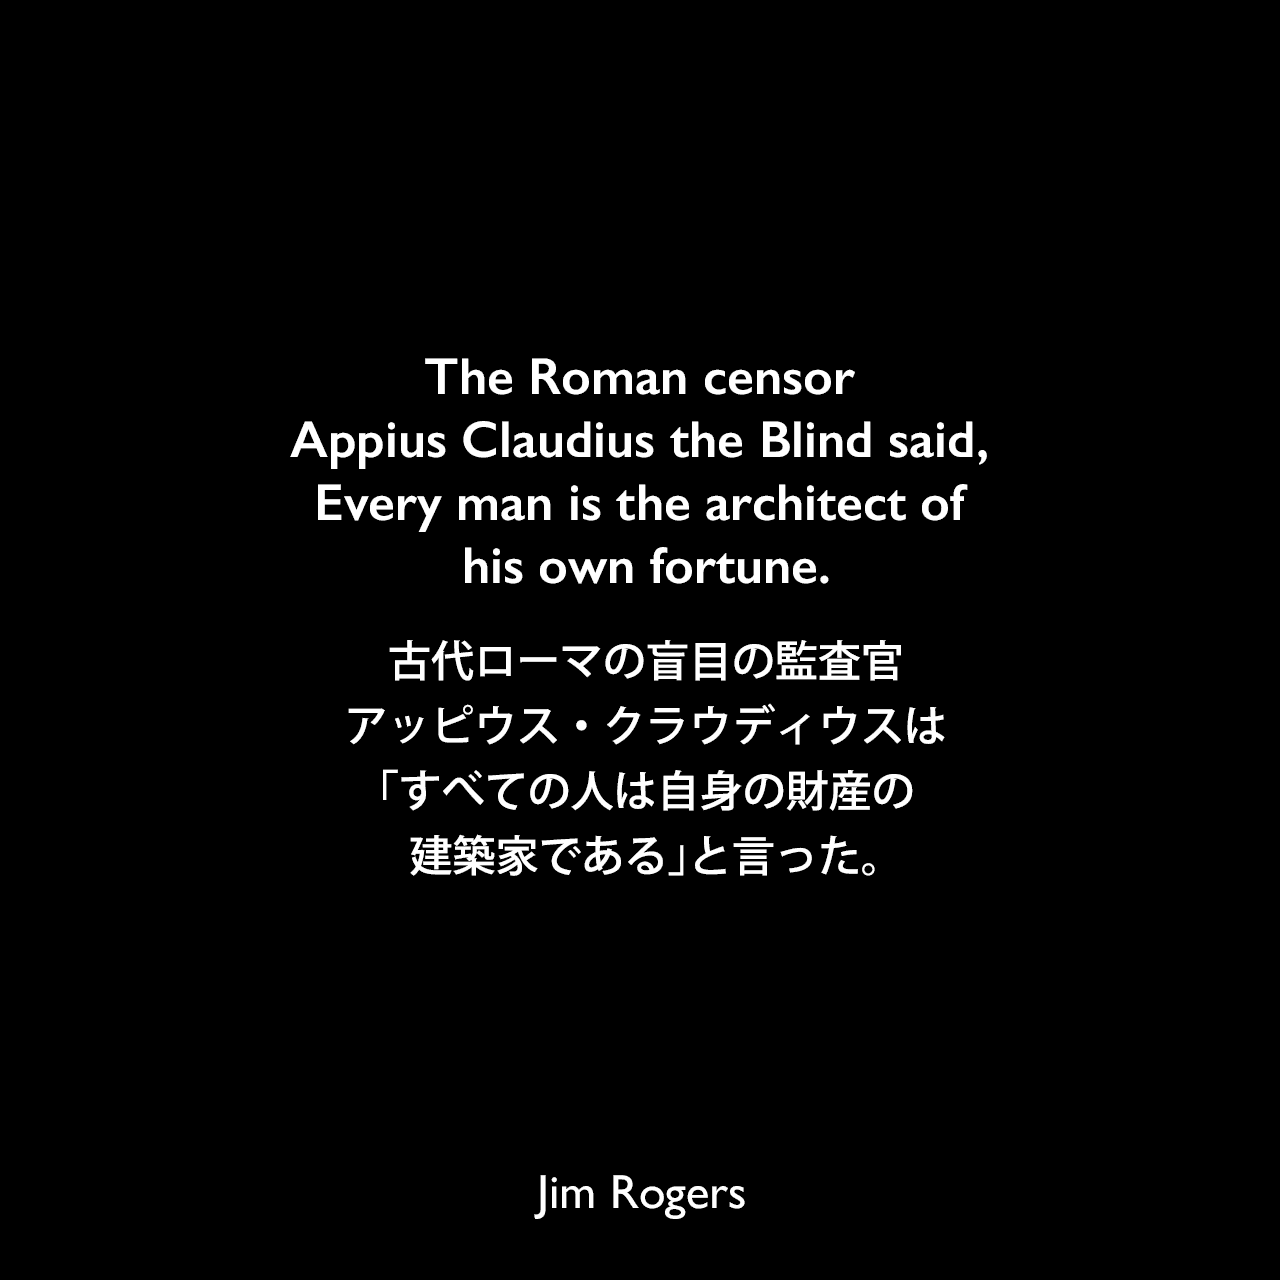 The Roman censor Appius Claudius the Blind said, Every man is the architect of his own fortune.古代ローマの盲目の監査官、アッピウス・クラウディウスは、「すべての人は自身の財産の建築家である」と言った。《参照：Street Smarts: Adventures on the Road and in the Markets(2013)》Jim Rogers